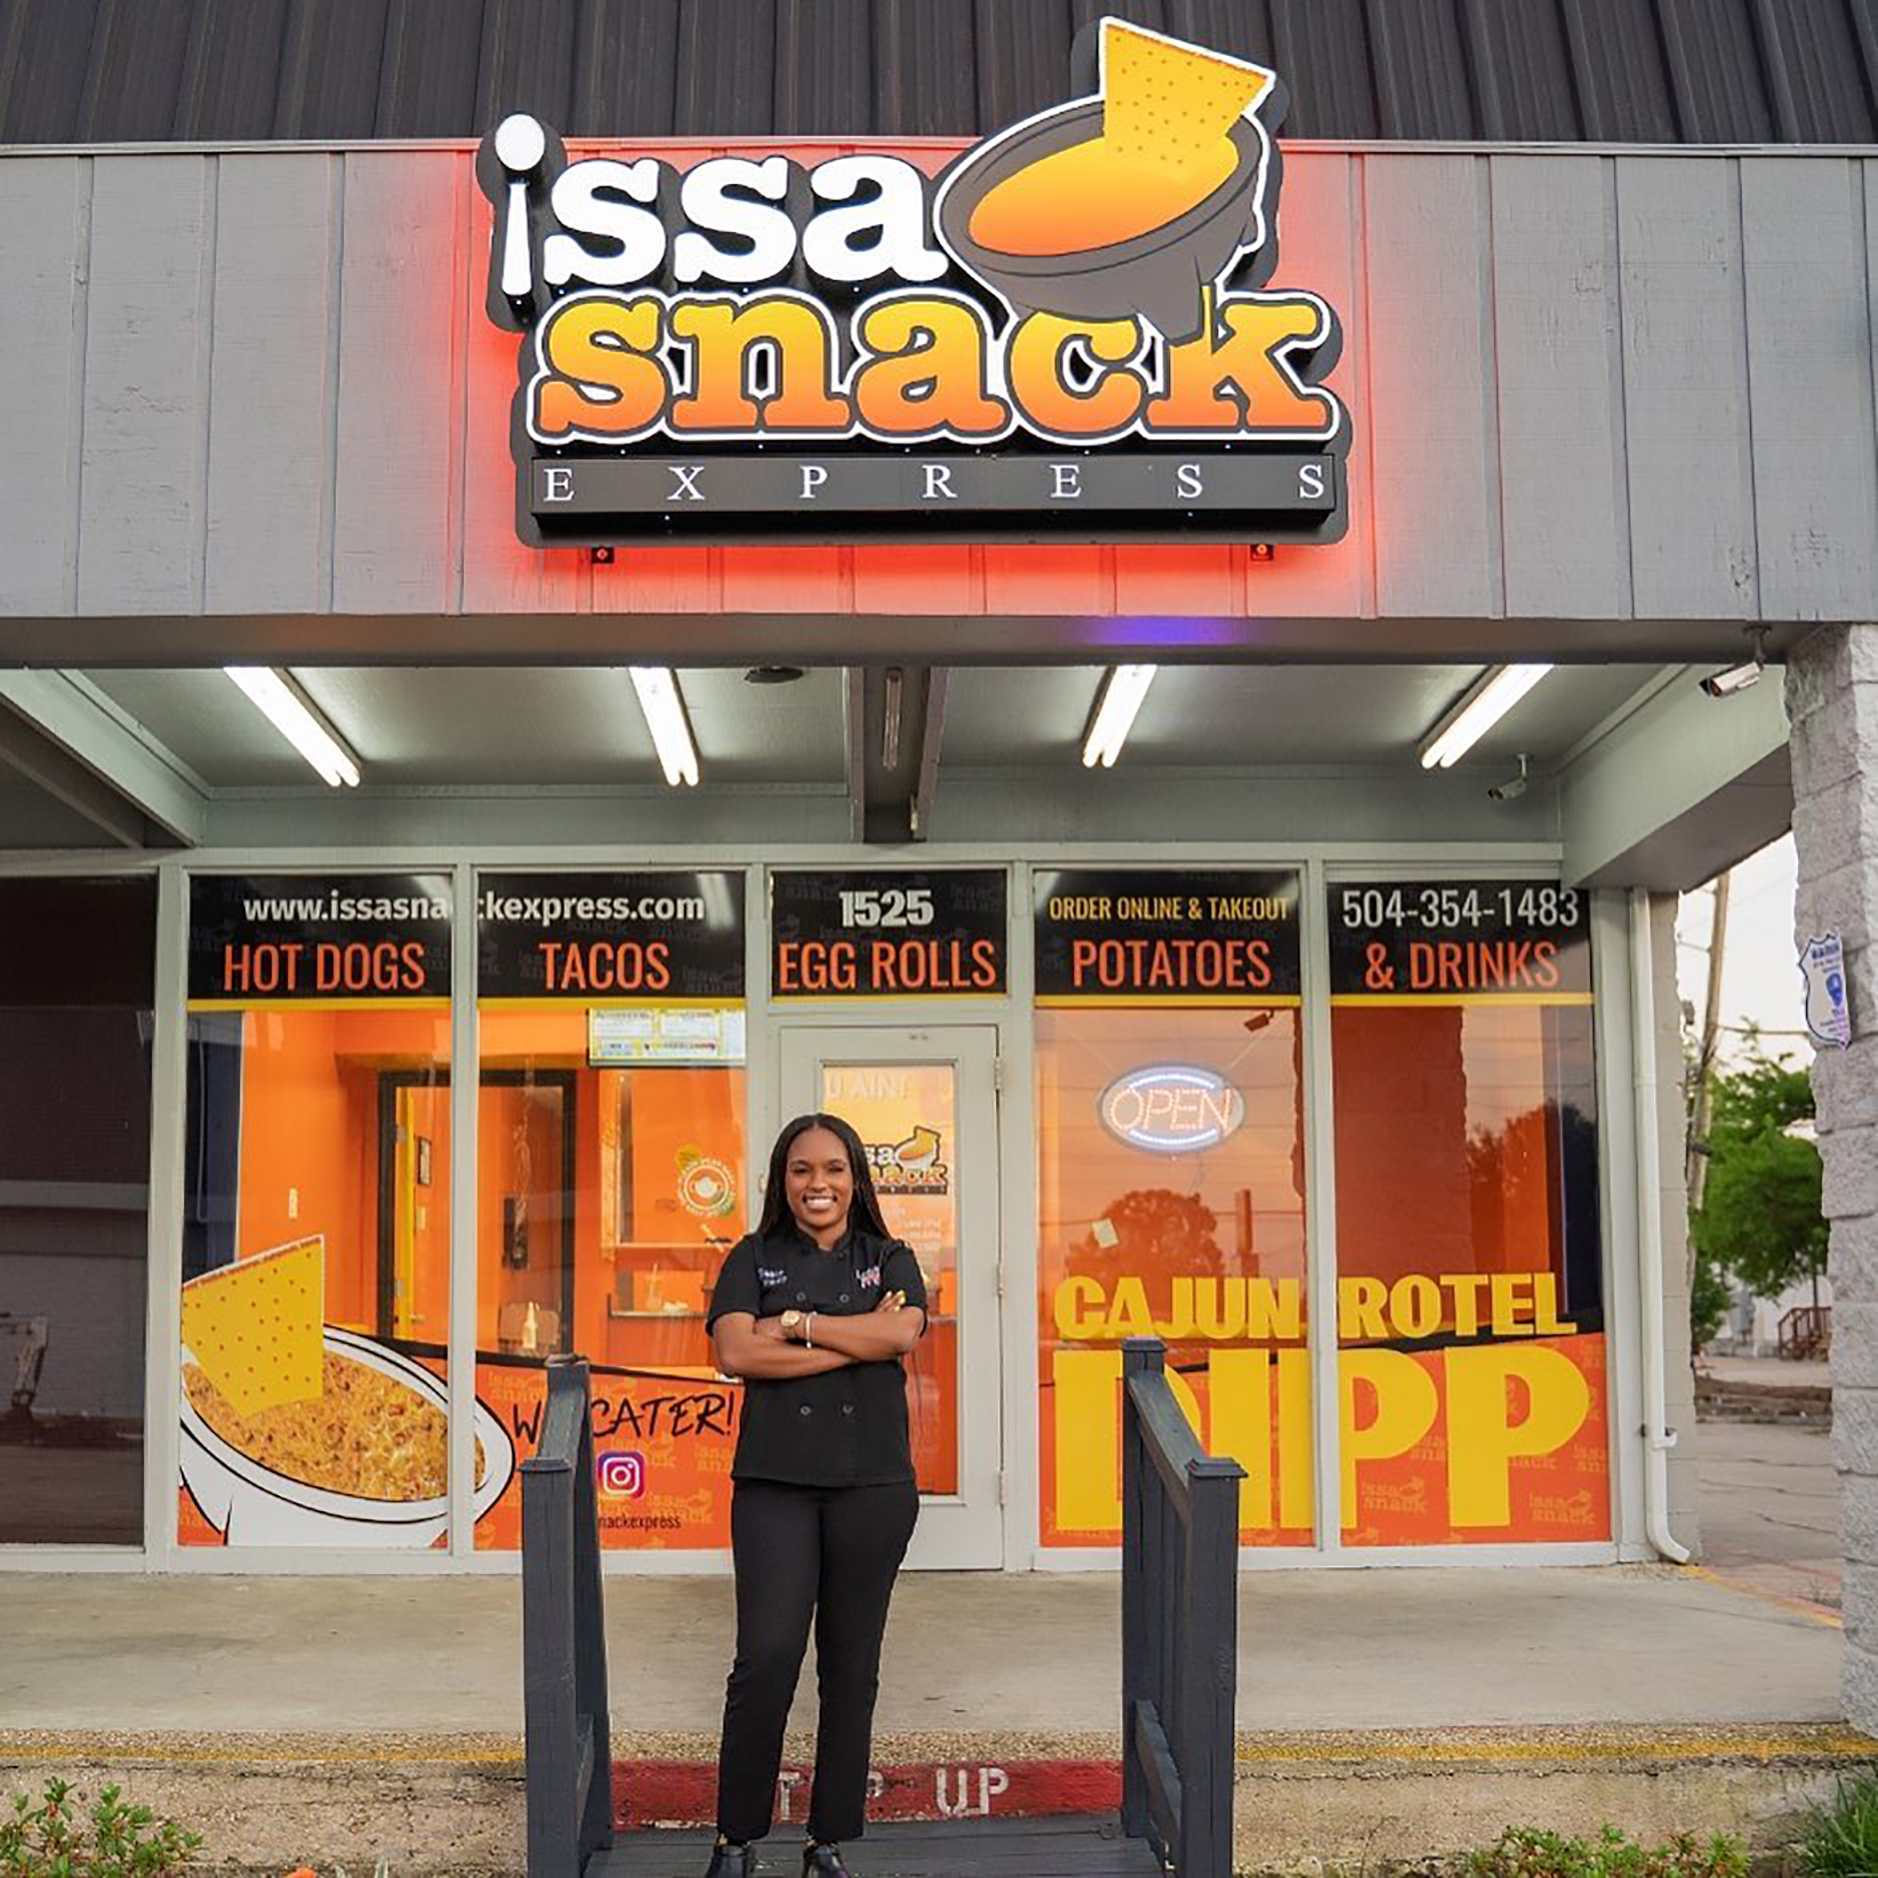 Issa Snack Express Owner Katie Kagler of #DowntownDipp Fame Steps Up To Fulfill Destiny